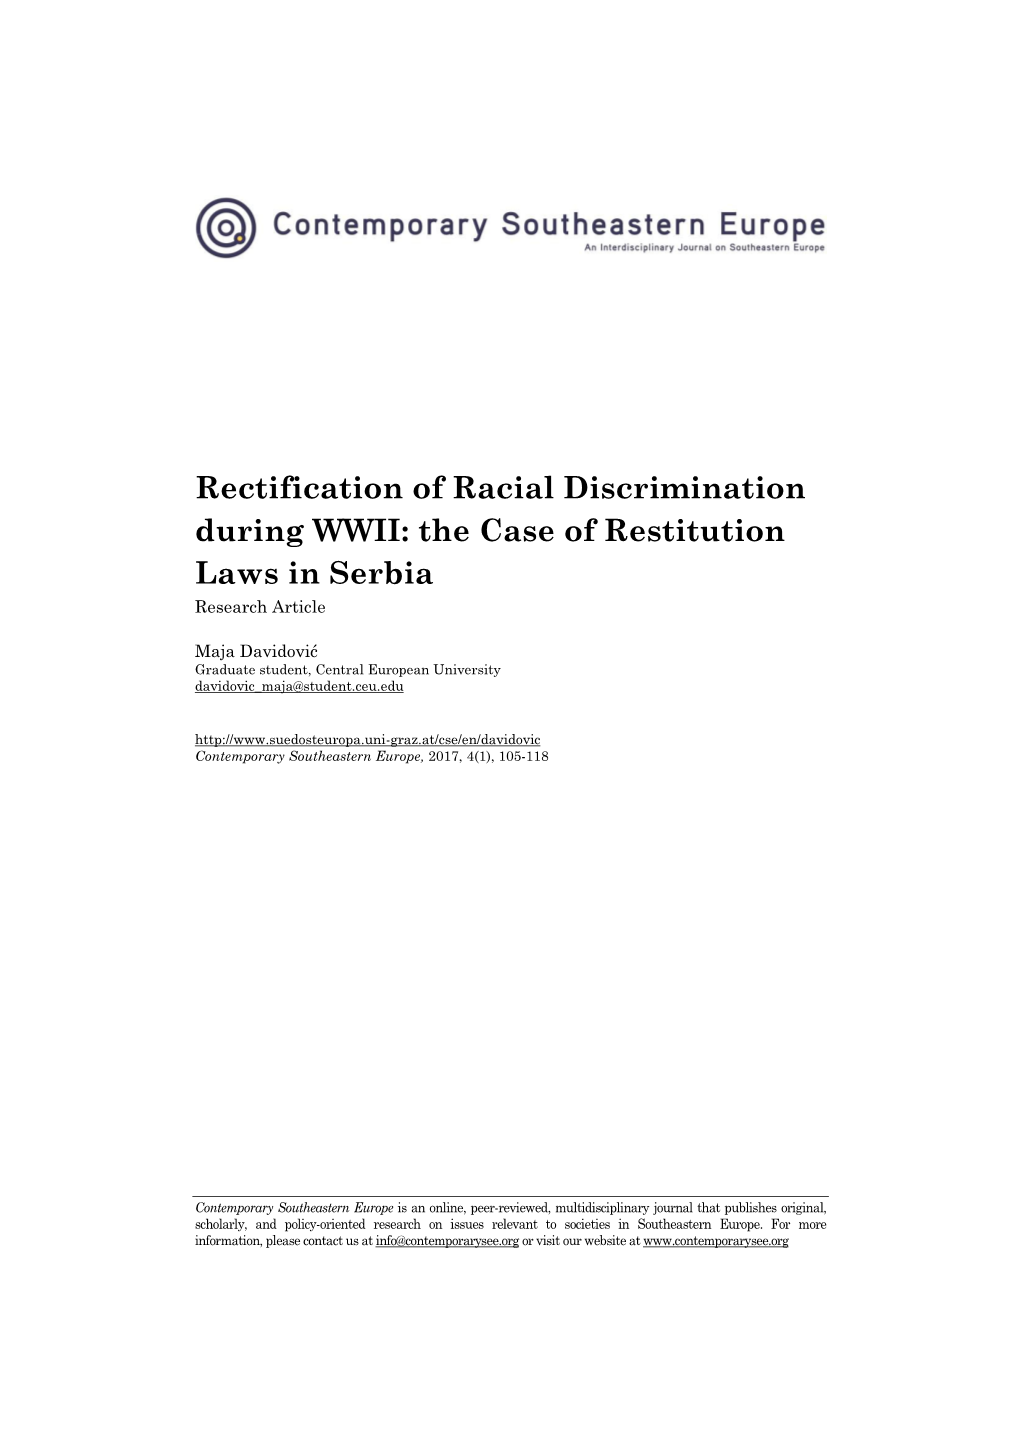 Rectification of Racial Discrimination During WWII: the Case of Restitution Laws in Serbia Research Article